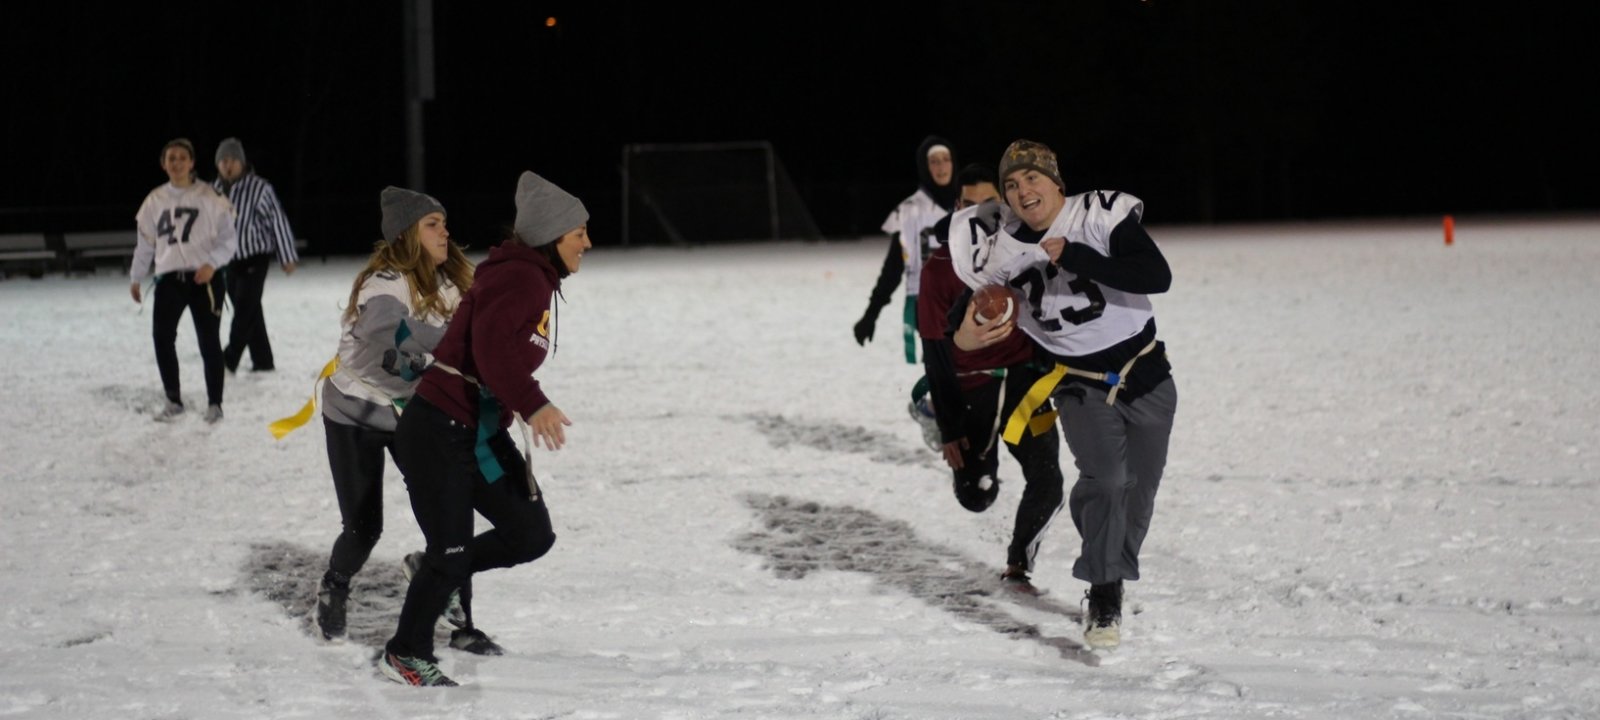 Michigan Tech Students playing flagg football in snow